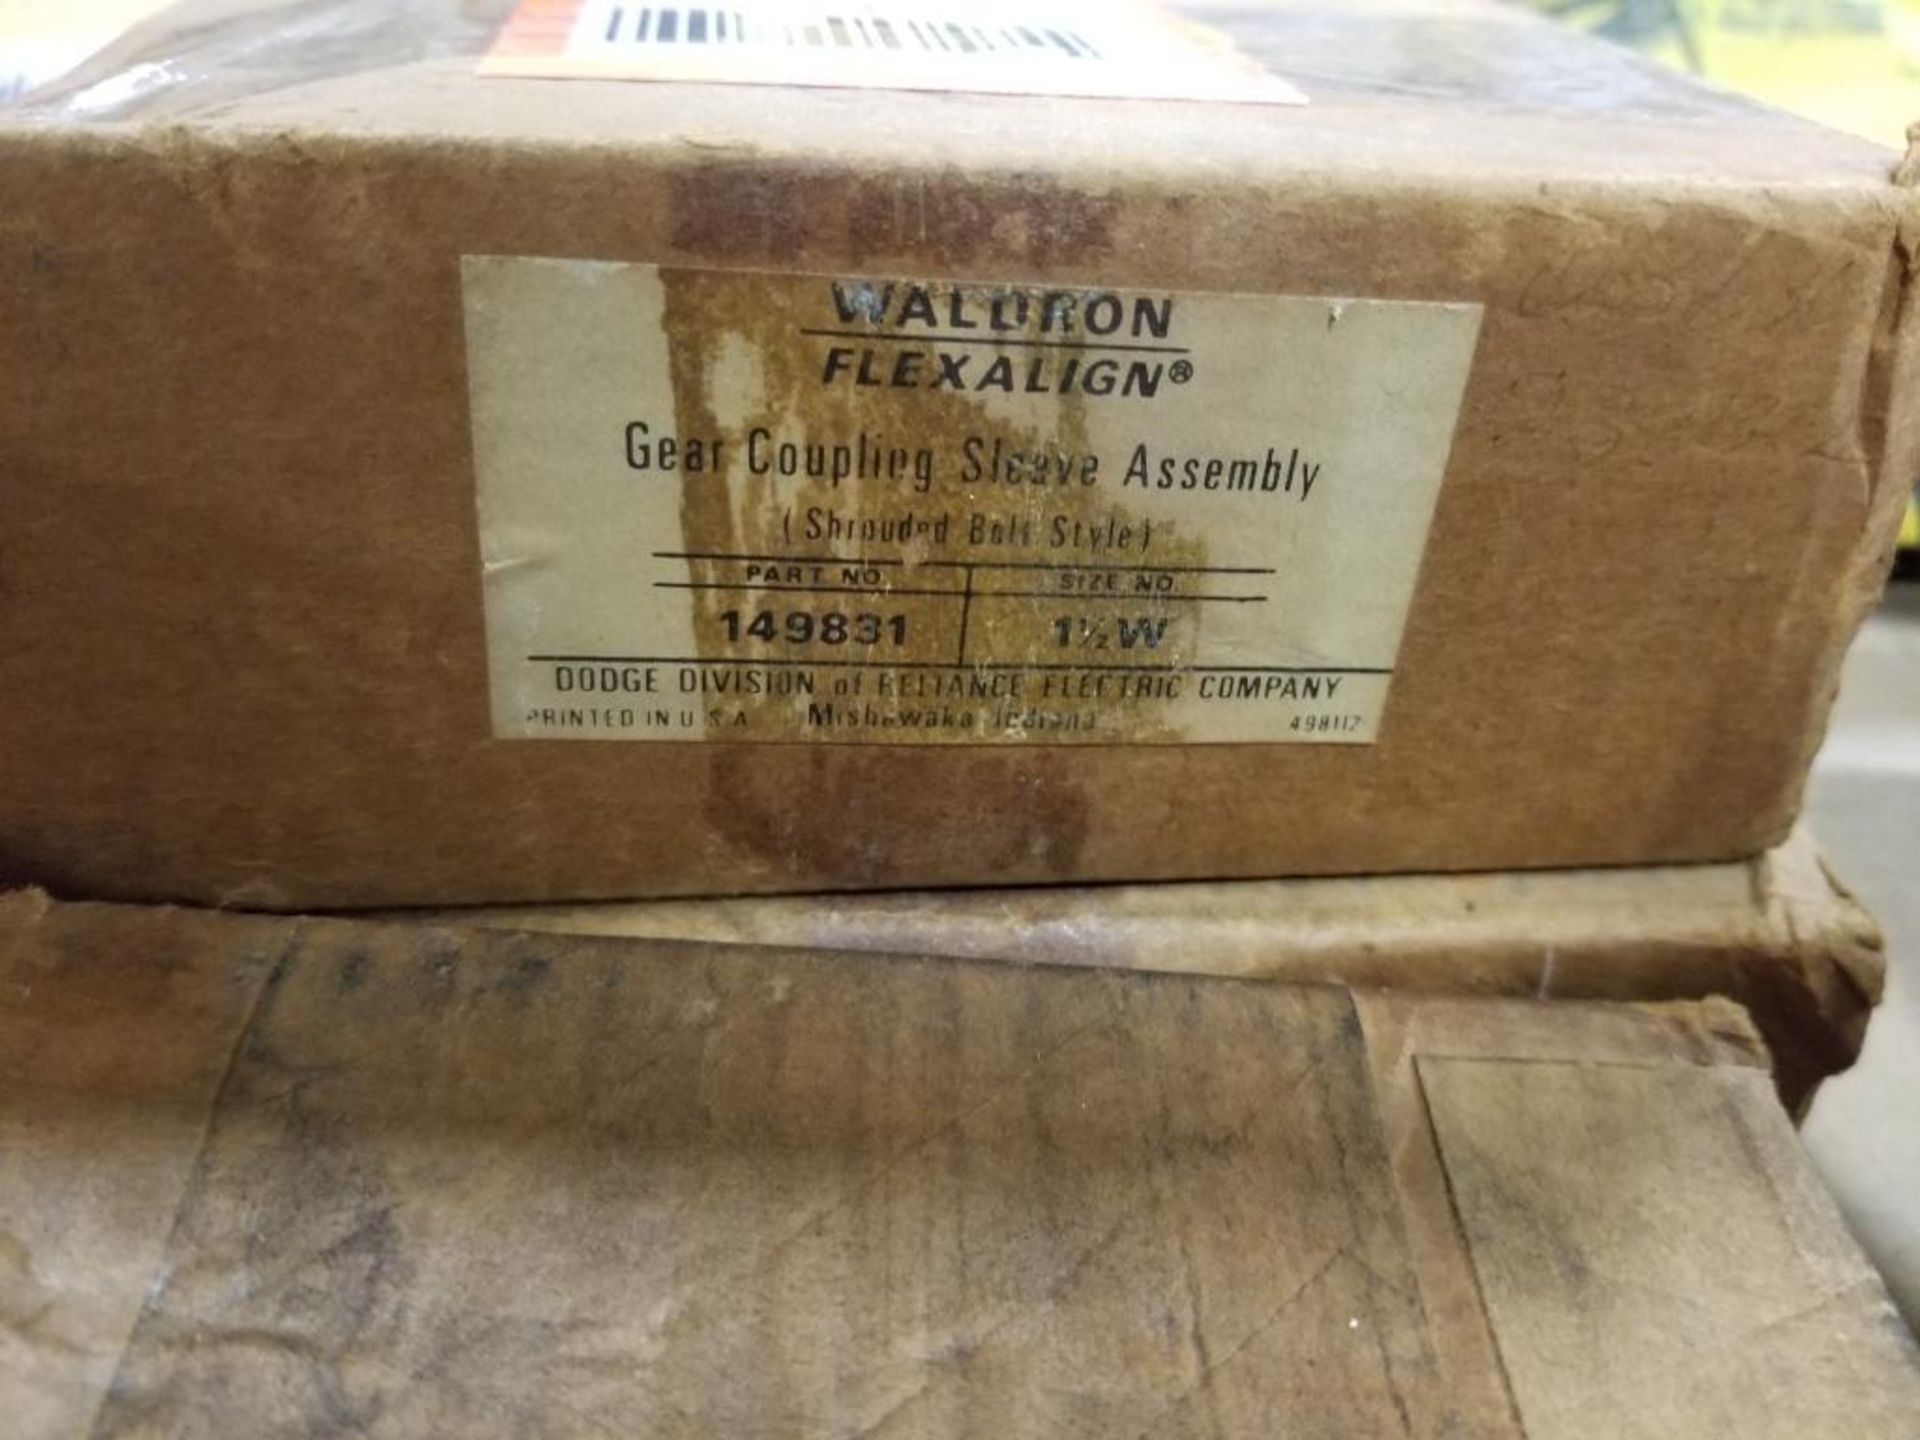 Qty 3 - Assorted gear coupling sleeve assembly. Waldron, Rexnord. New in box. - Image 3 of 4